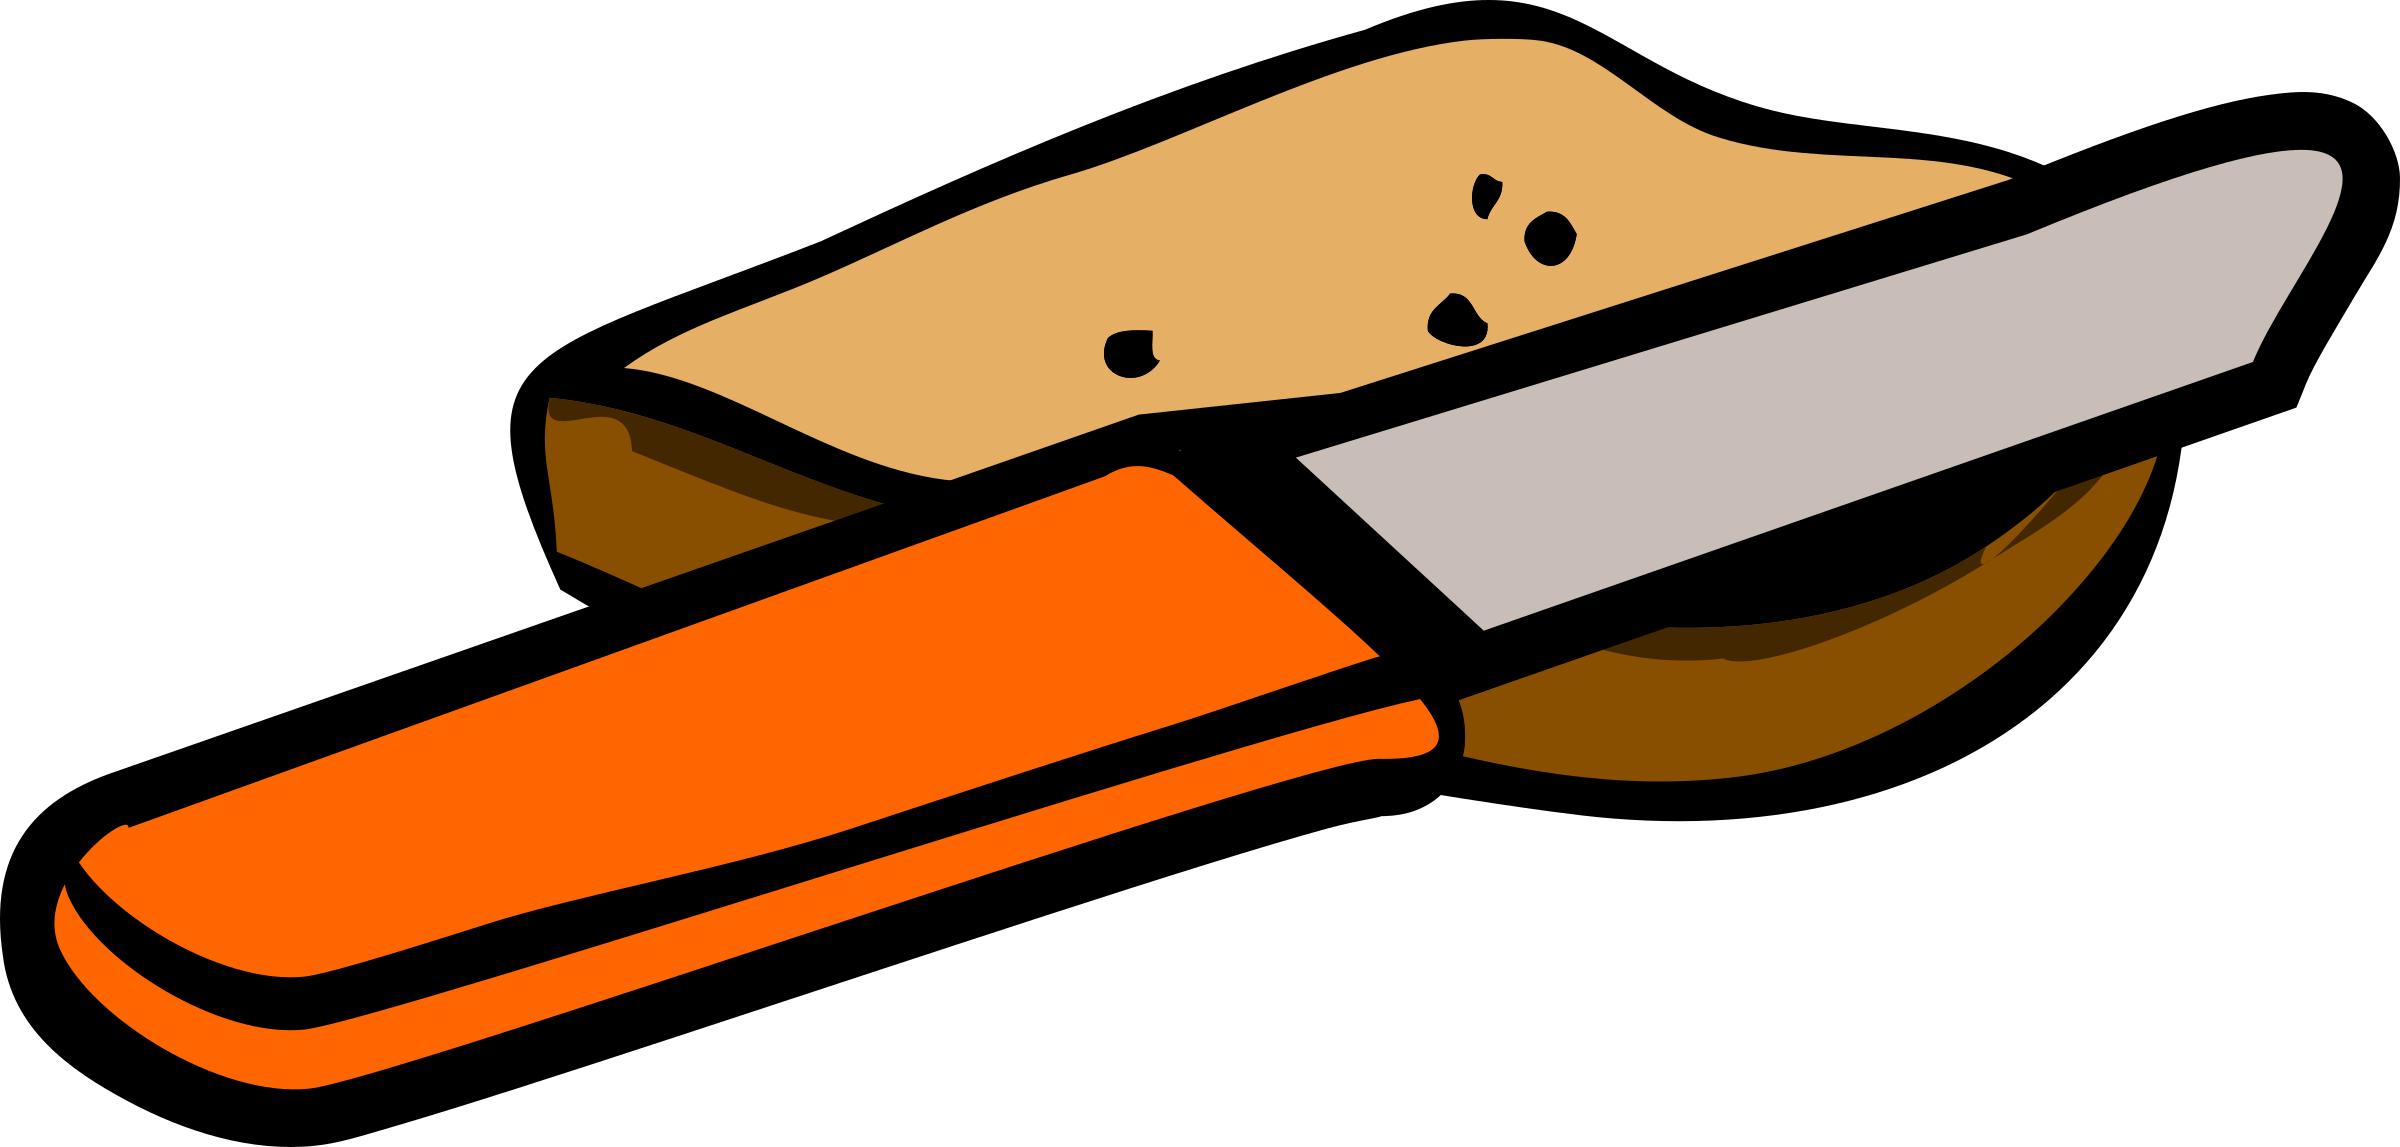 knife and piece of bread png